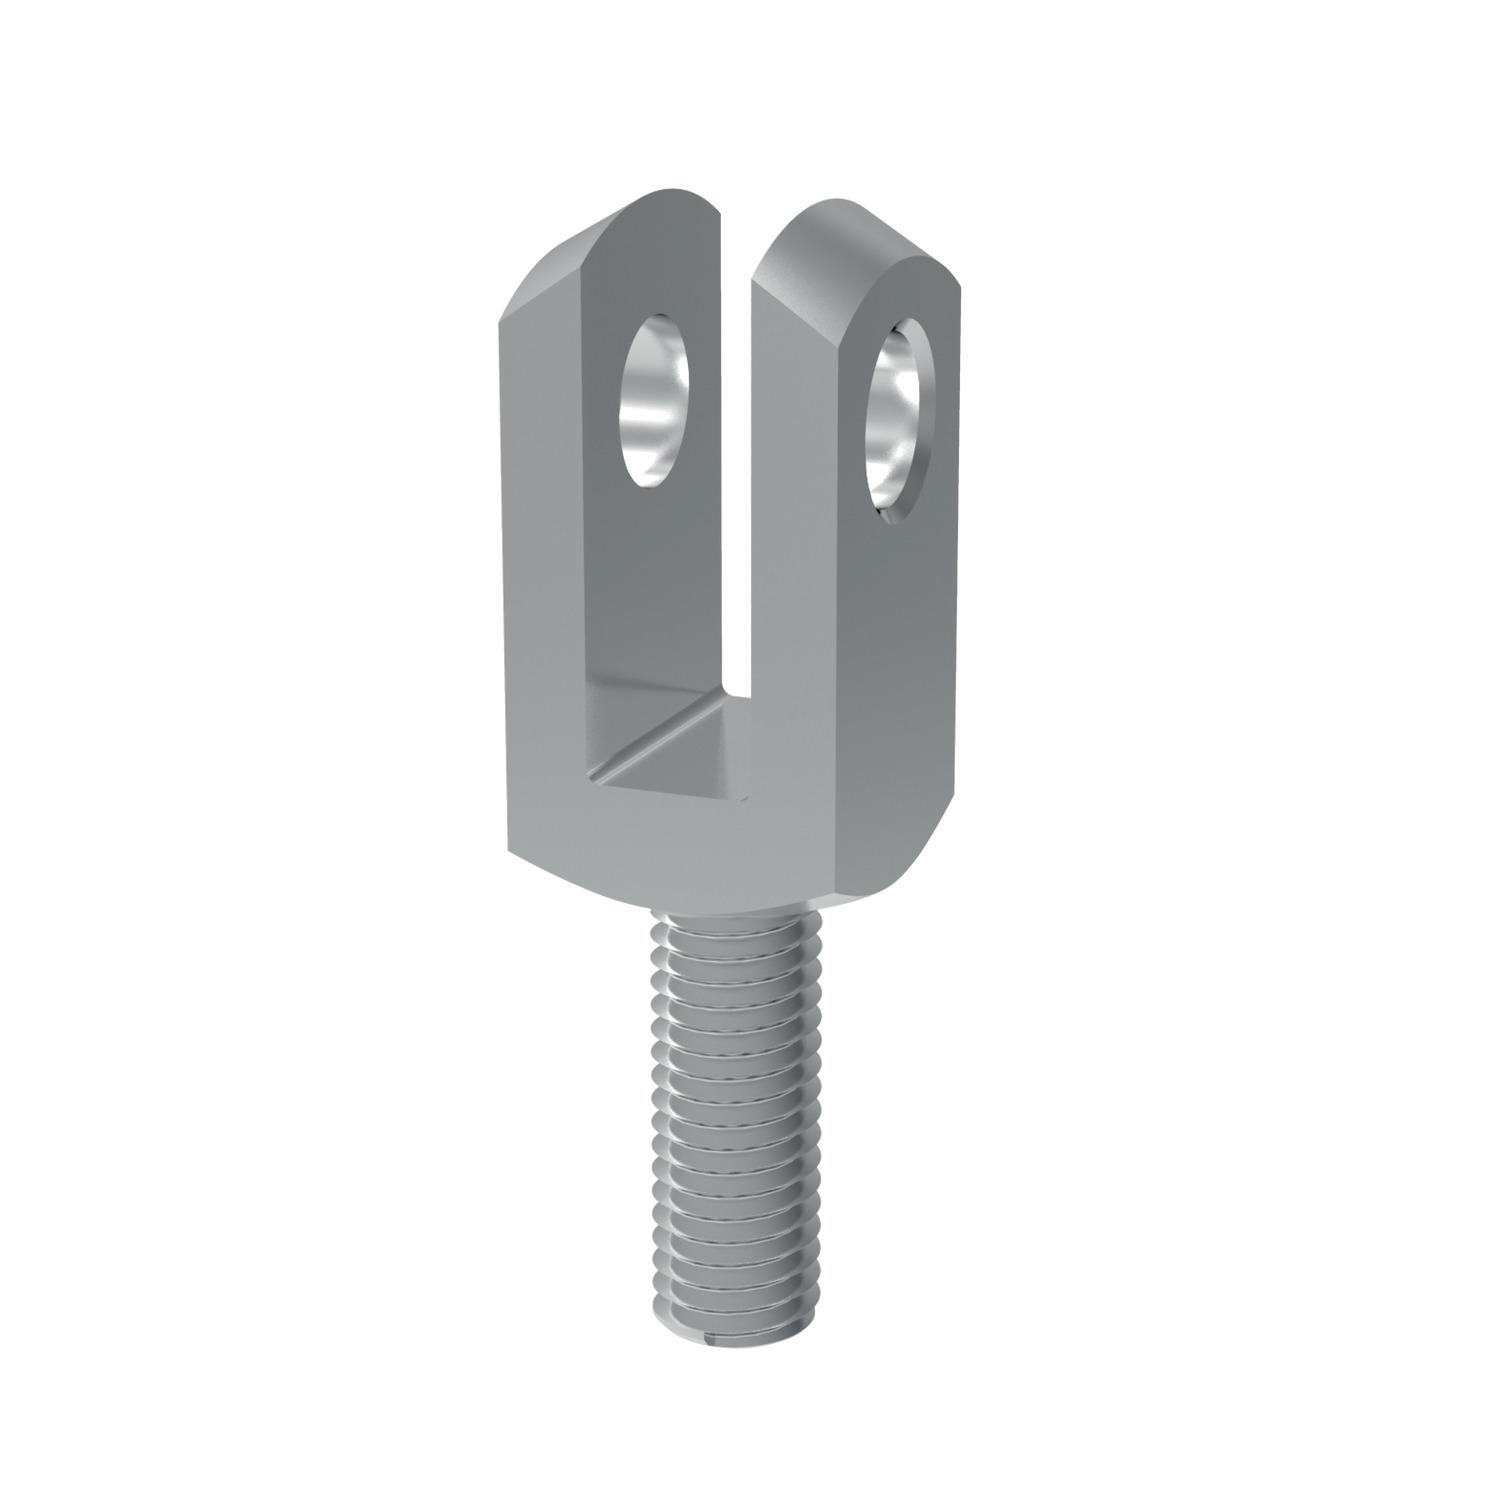 65645.W0006 Male Clevis Joints - Stainless steel. 